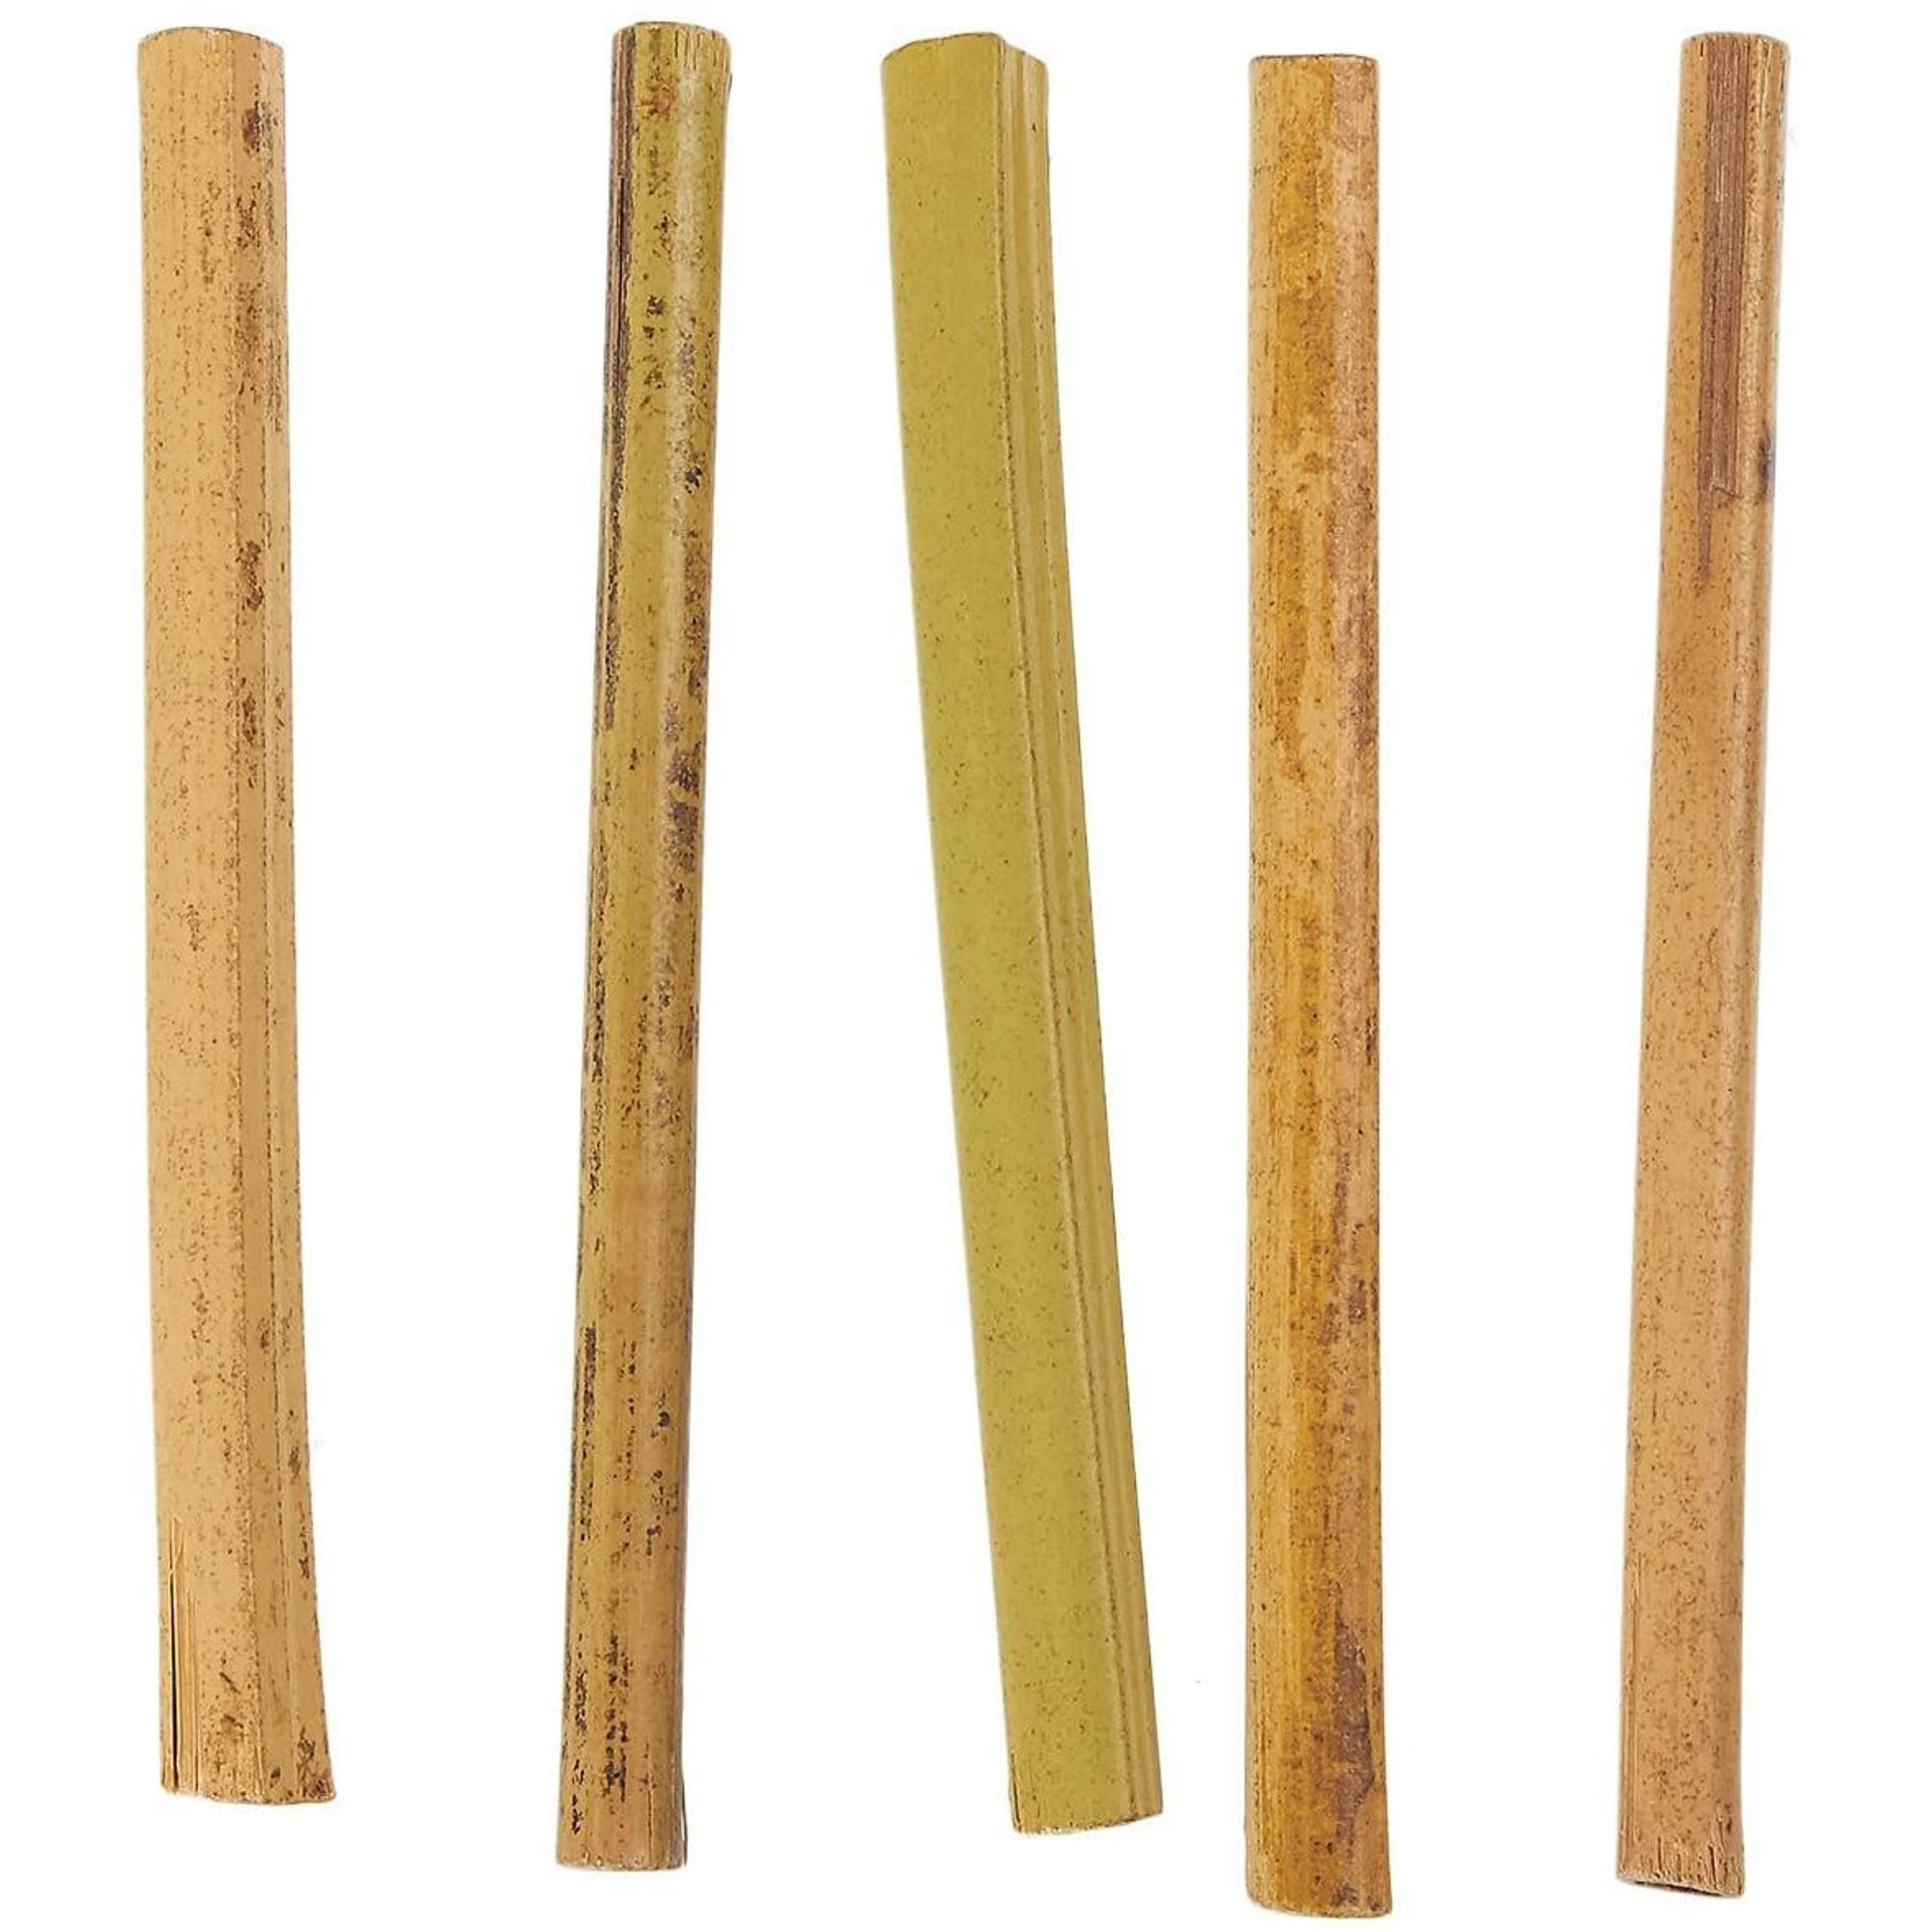 iA Crafts Bamboo Sticks, Bamboo Straws, Bamboo Stakes Craft Supplies, for Crafts and DIY, Natural Bamboo Color, 5.7” – 5.9” Long and 0.24”-0.28” in